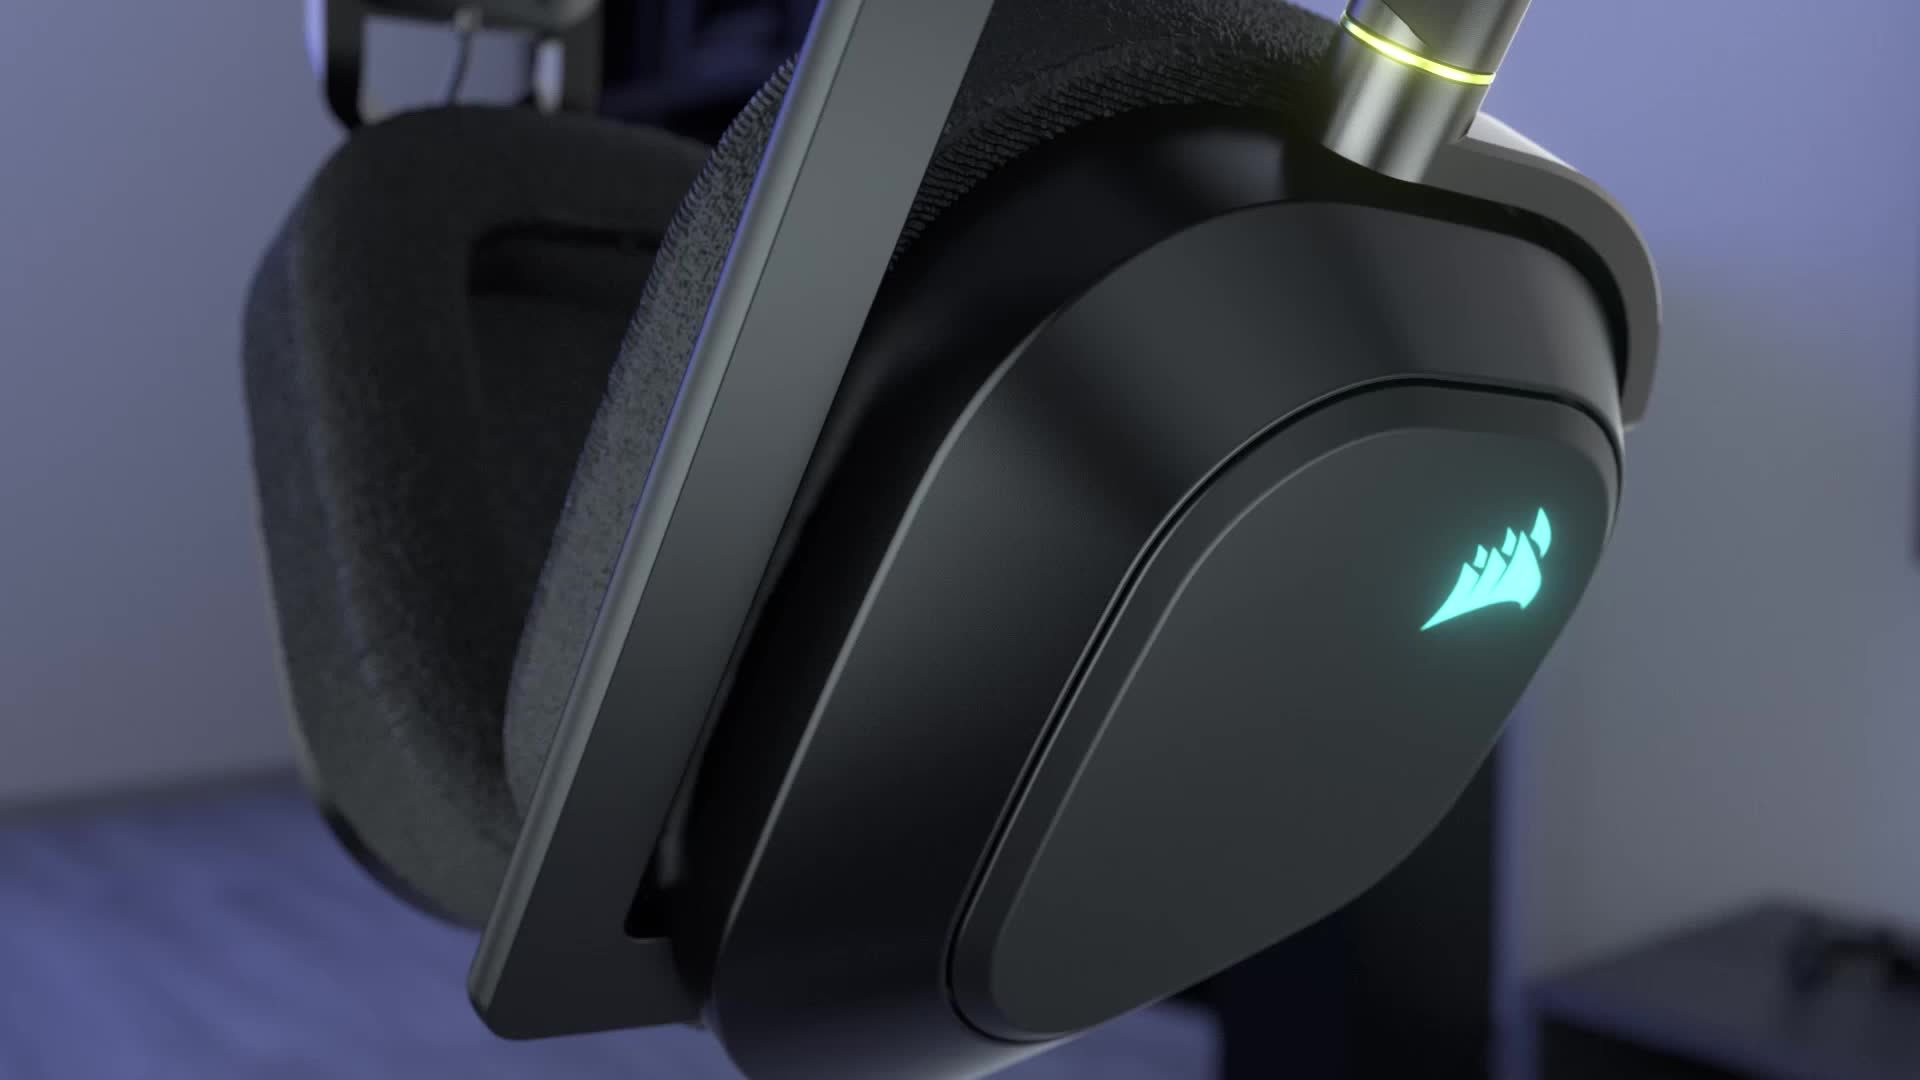 Corsair HS80 RGB WIRELESS Premium Gaming Headset with Dolby Atmos Audio (Low-Latency, Omni-Directional Microphone, 60ft Range, Up to 20 Hours Battery